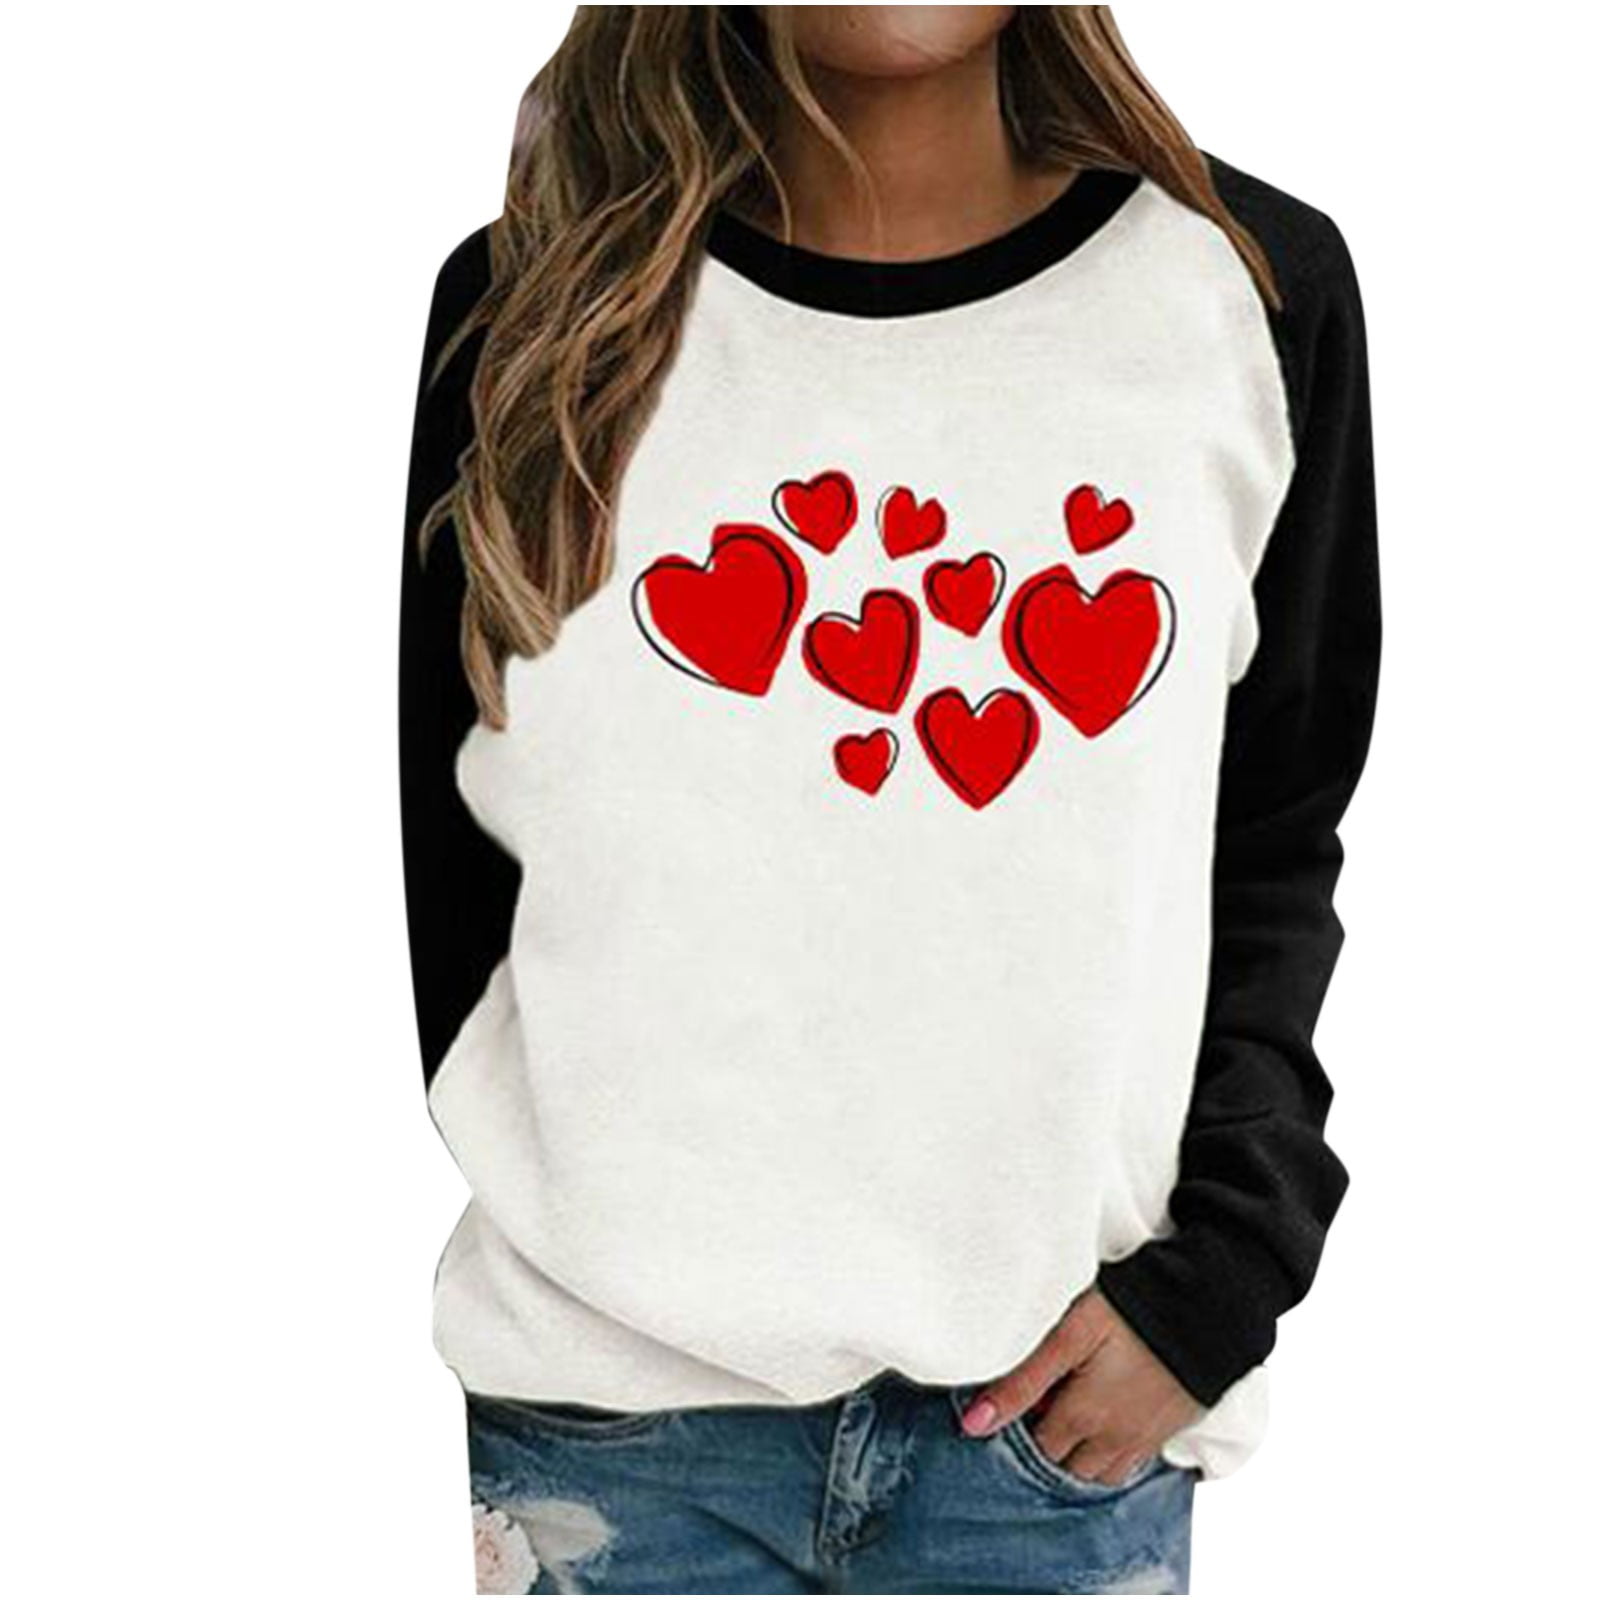 HAPIMO Discount Valentine's Day Shirts for Women Valentine Heart-Shaped  Graphic Print Tops Womens Cozy Raglan Blouse Couples Fashion Sweatshirt Long  Sleeve T-Shirt Round Neck Pullover Red XXL 